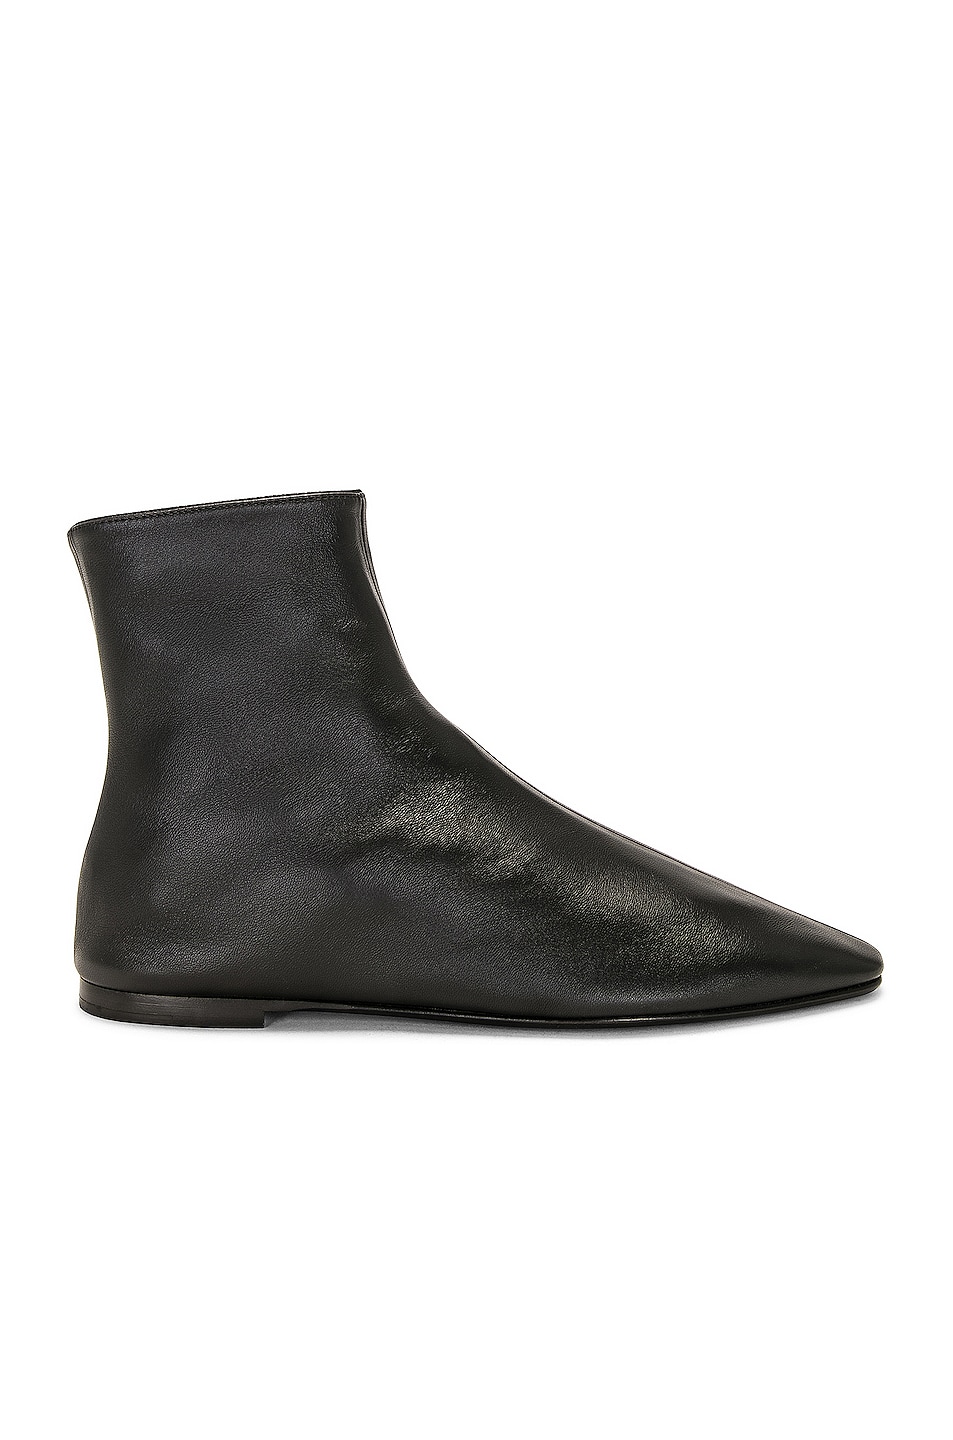 Image 1 of The Row Ava Booties in Black